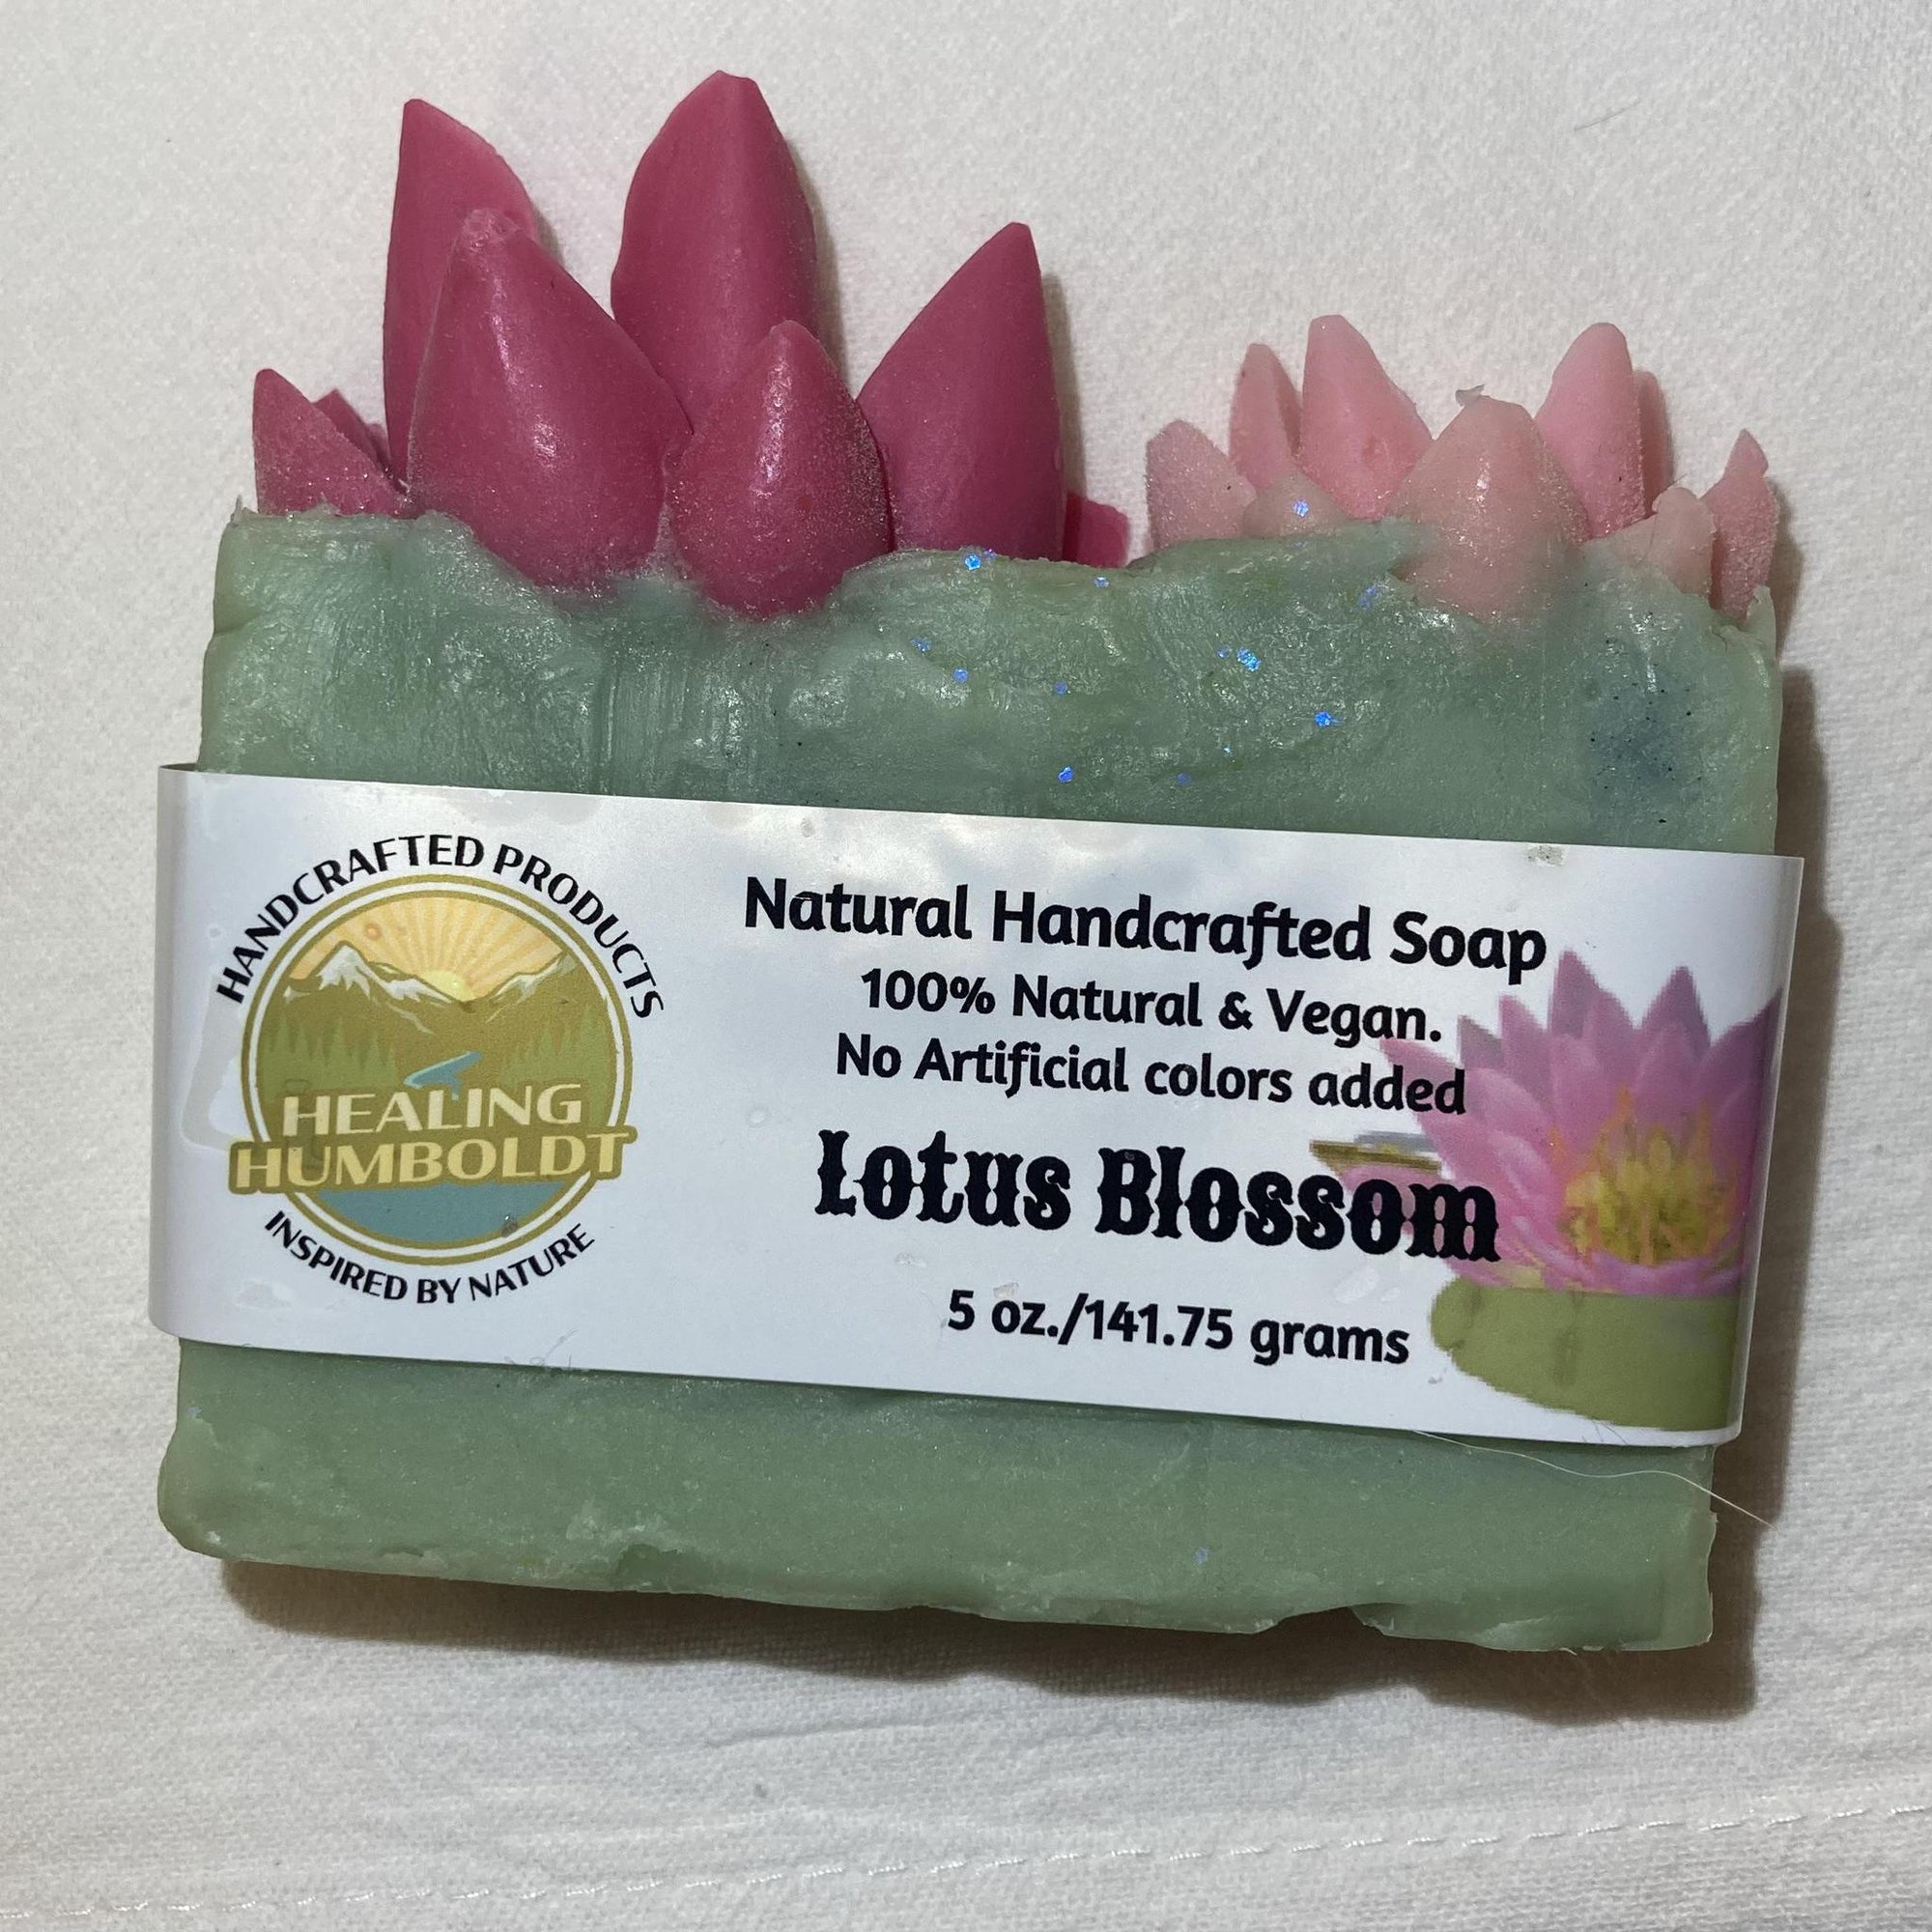 Healing Humboldt Handcrafted Soap | Lotus Blossom